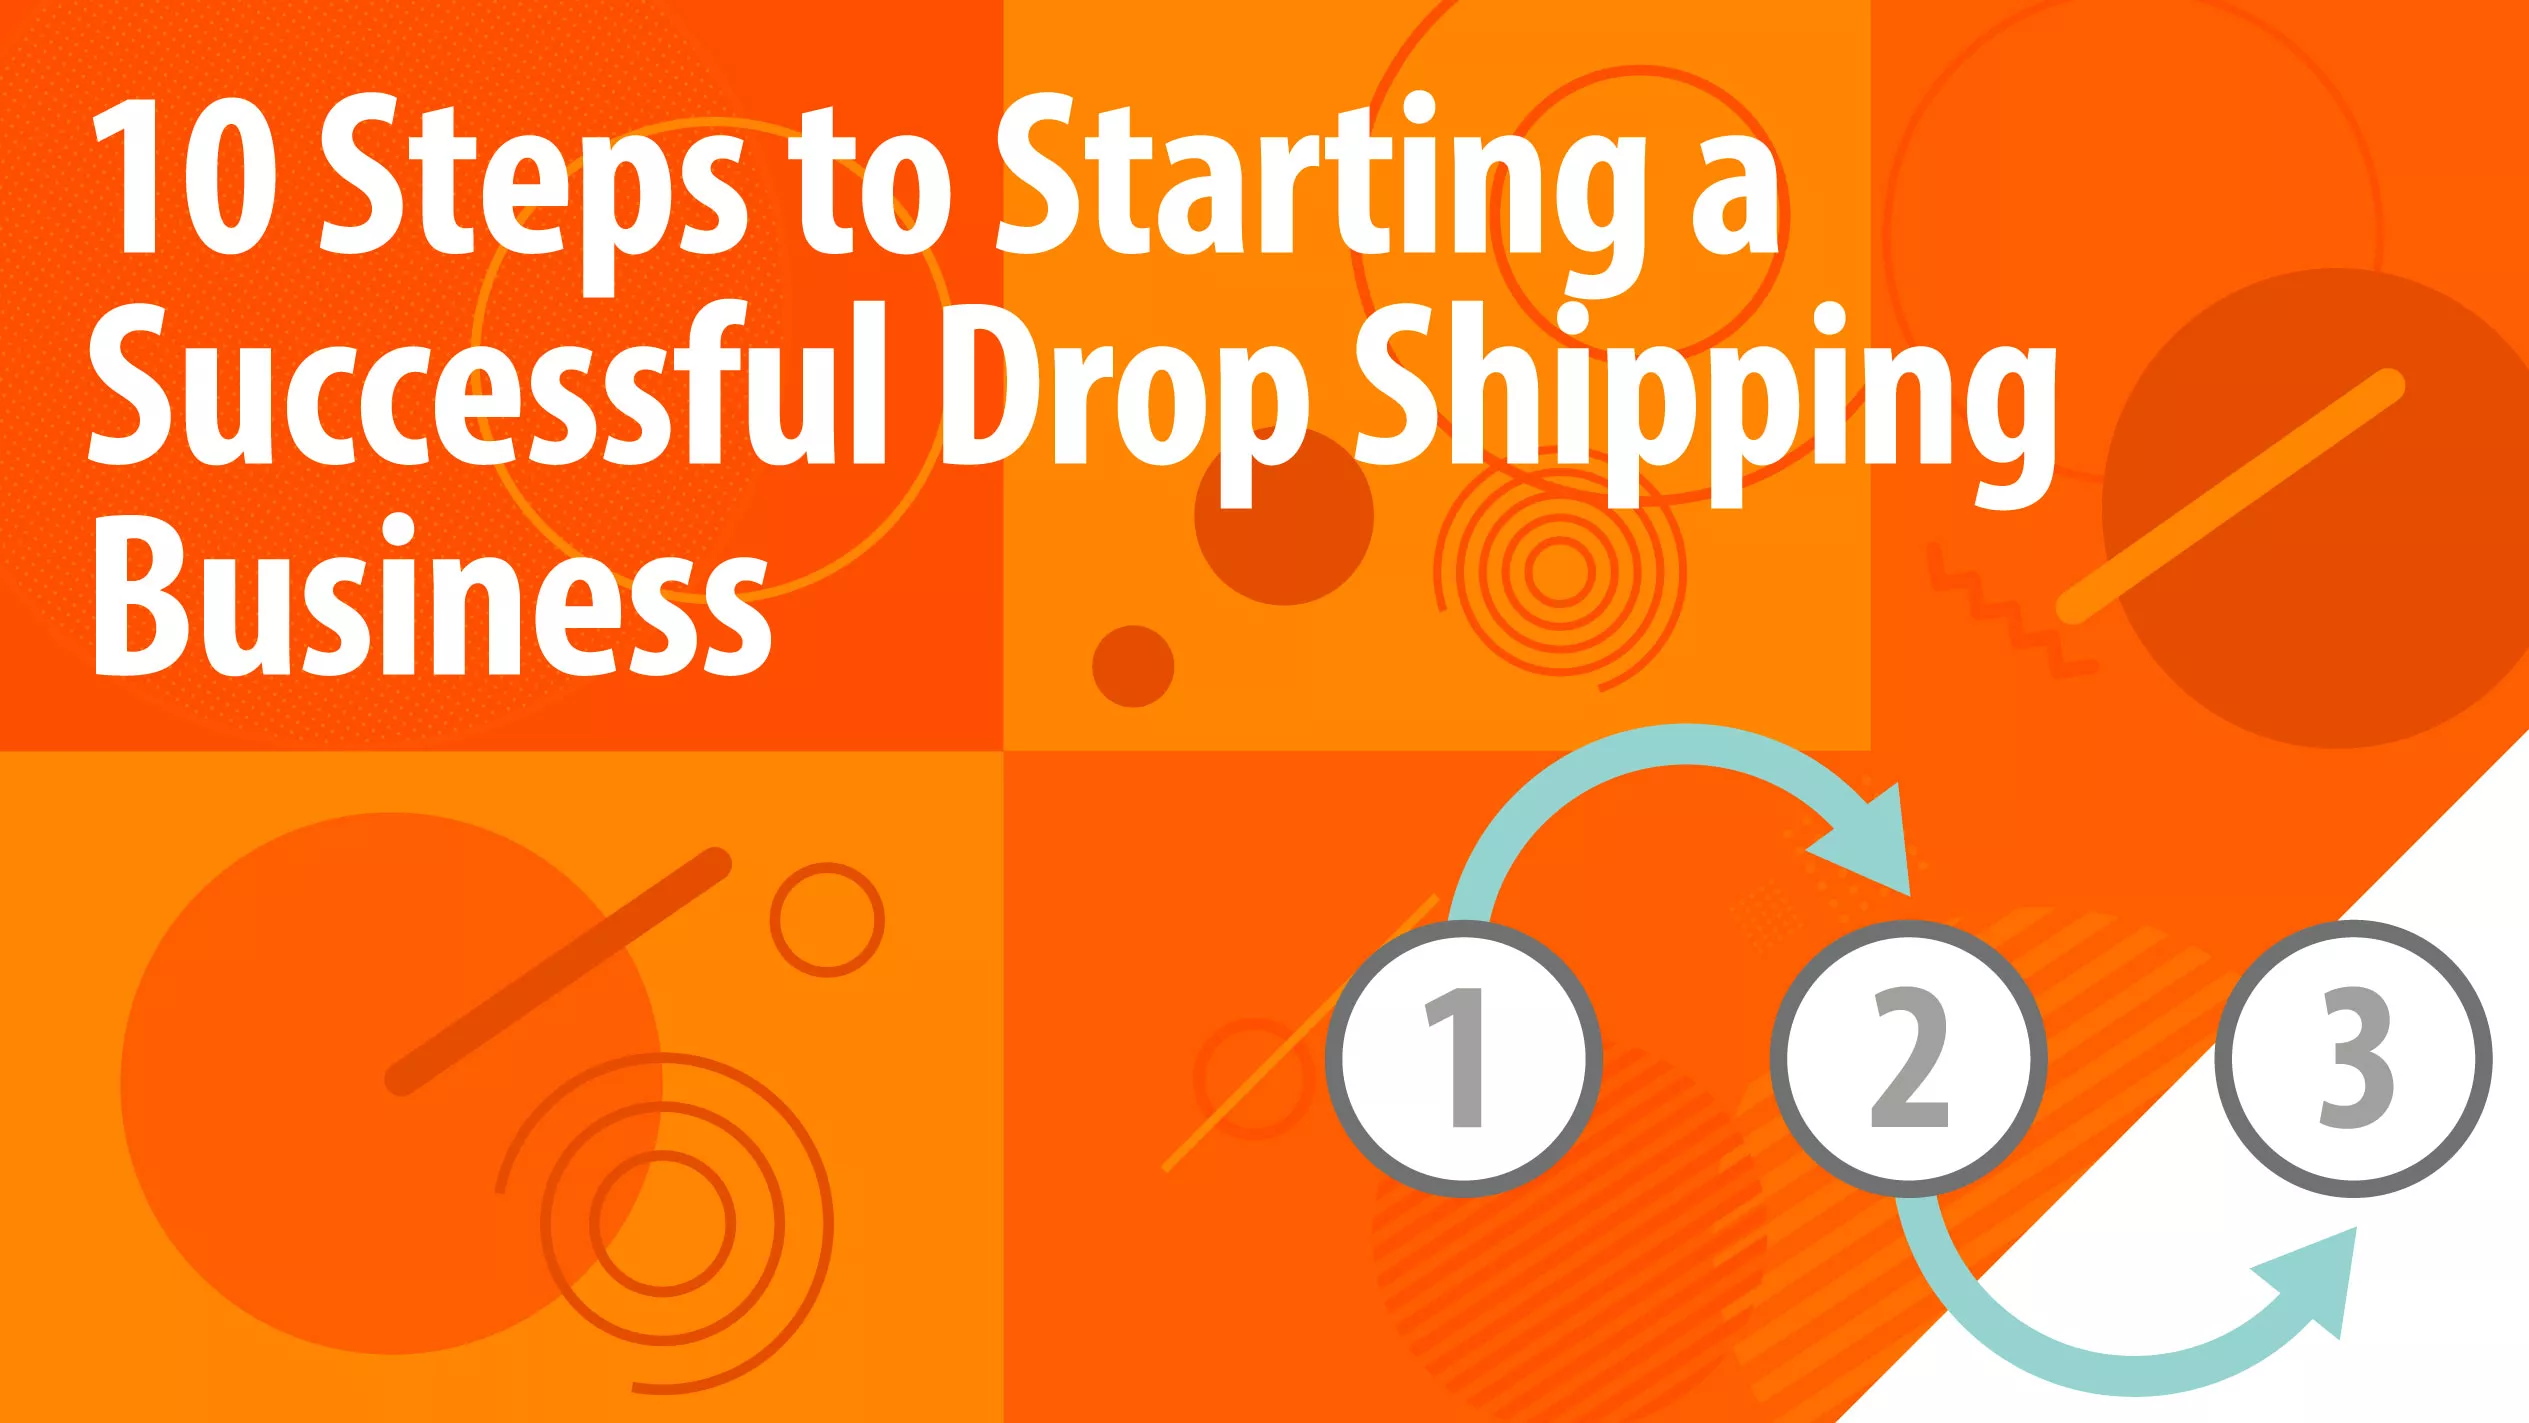 Drop Shipping 10 Steps Article Header